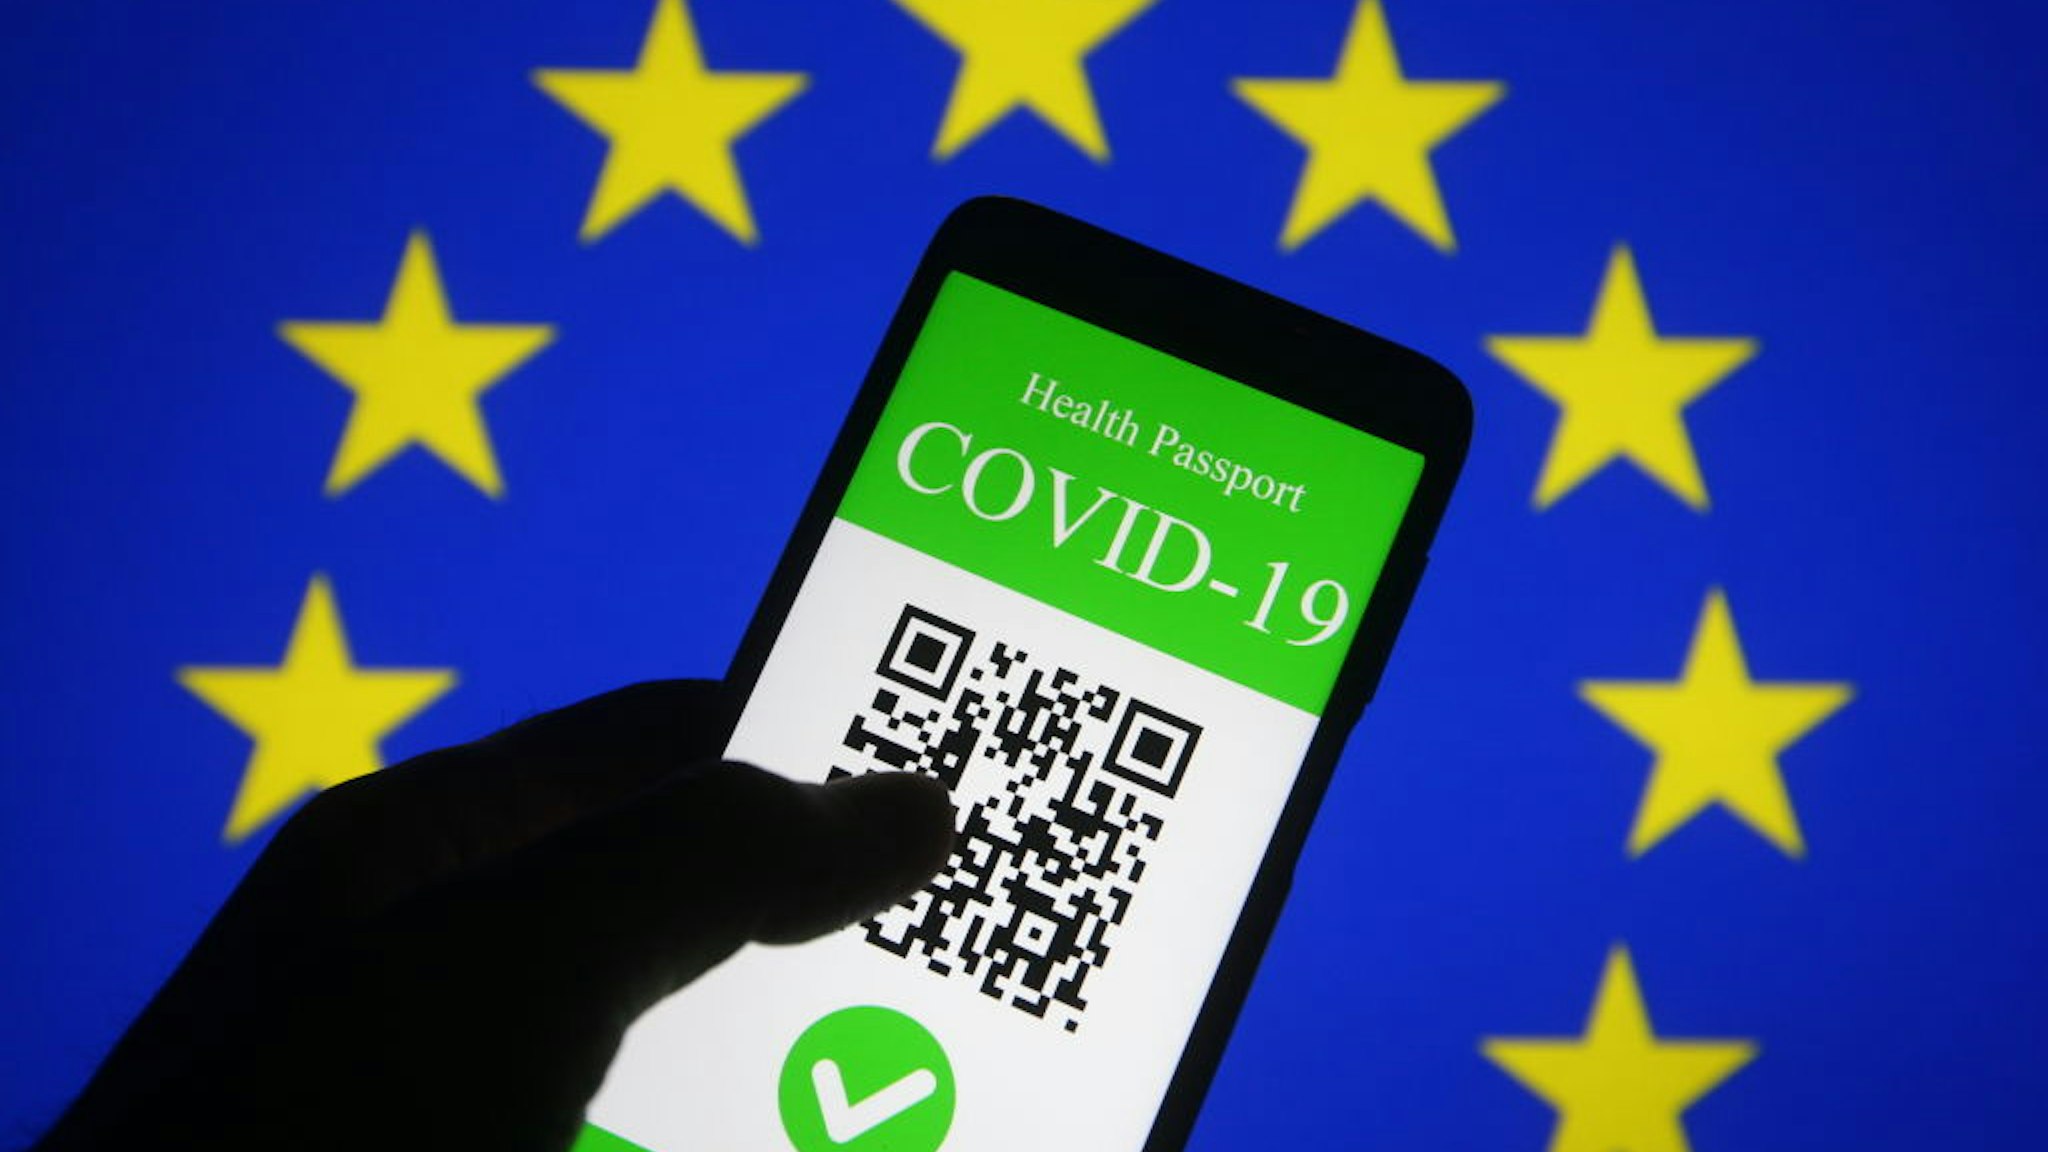 UKRAINE - 2021/03/28: In this photo illustration, a symbolic COVID-19 health passport seen displayed on a smartphone screen in front of the EU flag. On March 17 the European Commission presented a proposal to create a Digital Green Certificate to facilitate the safe free movement of the EU citizens during the COVID-19 pandemic.